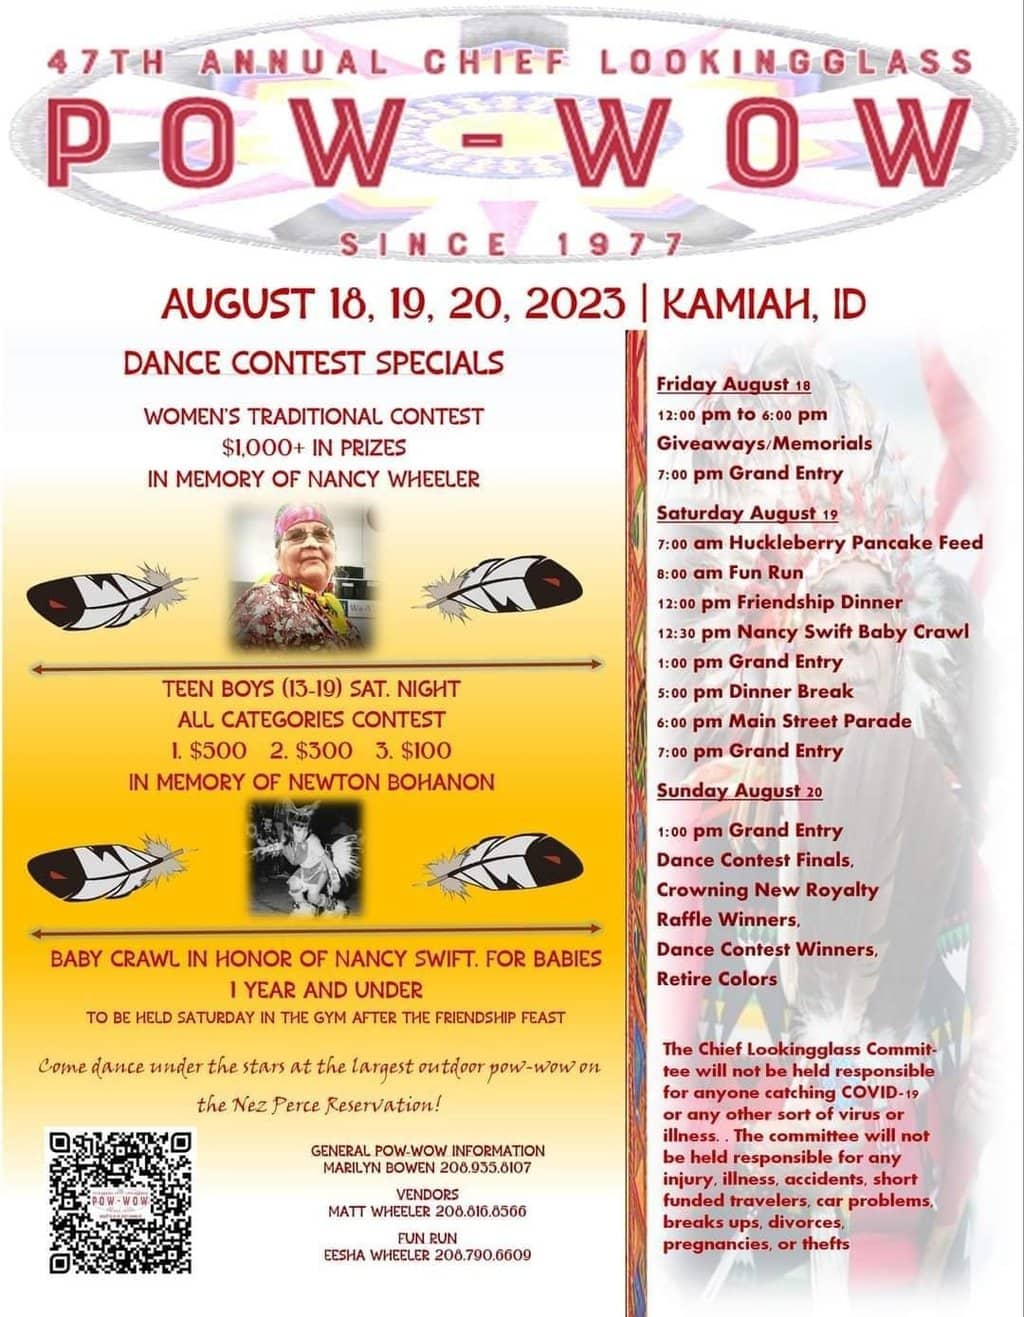 47th Annual Chief Looking Glass Pow Wow 2023